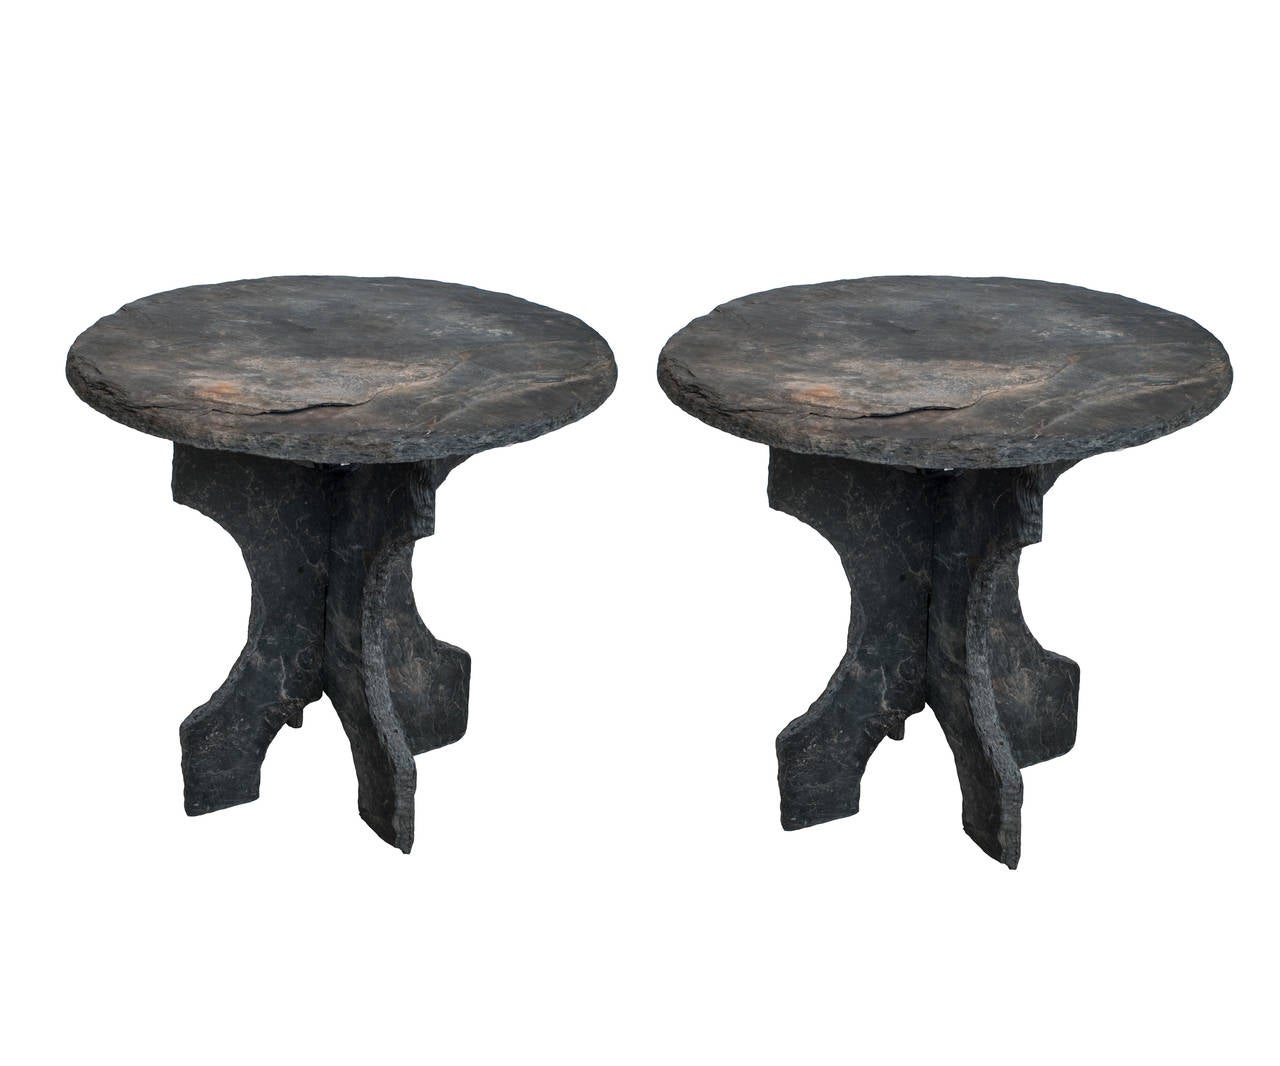 A pair of exquisite antique slate tables. Only sold as a pair.